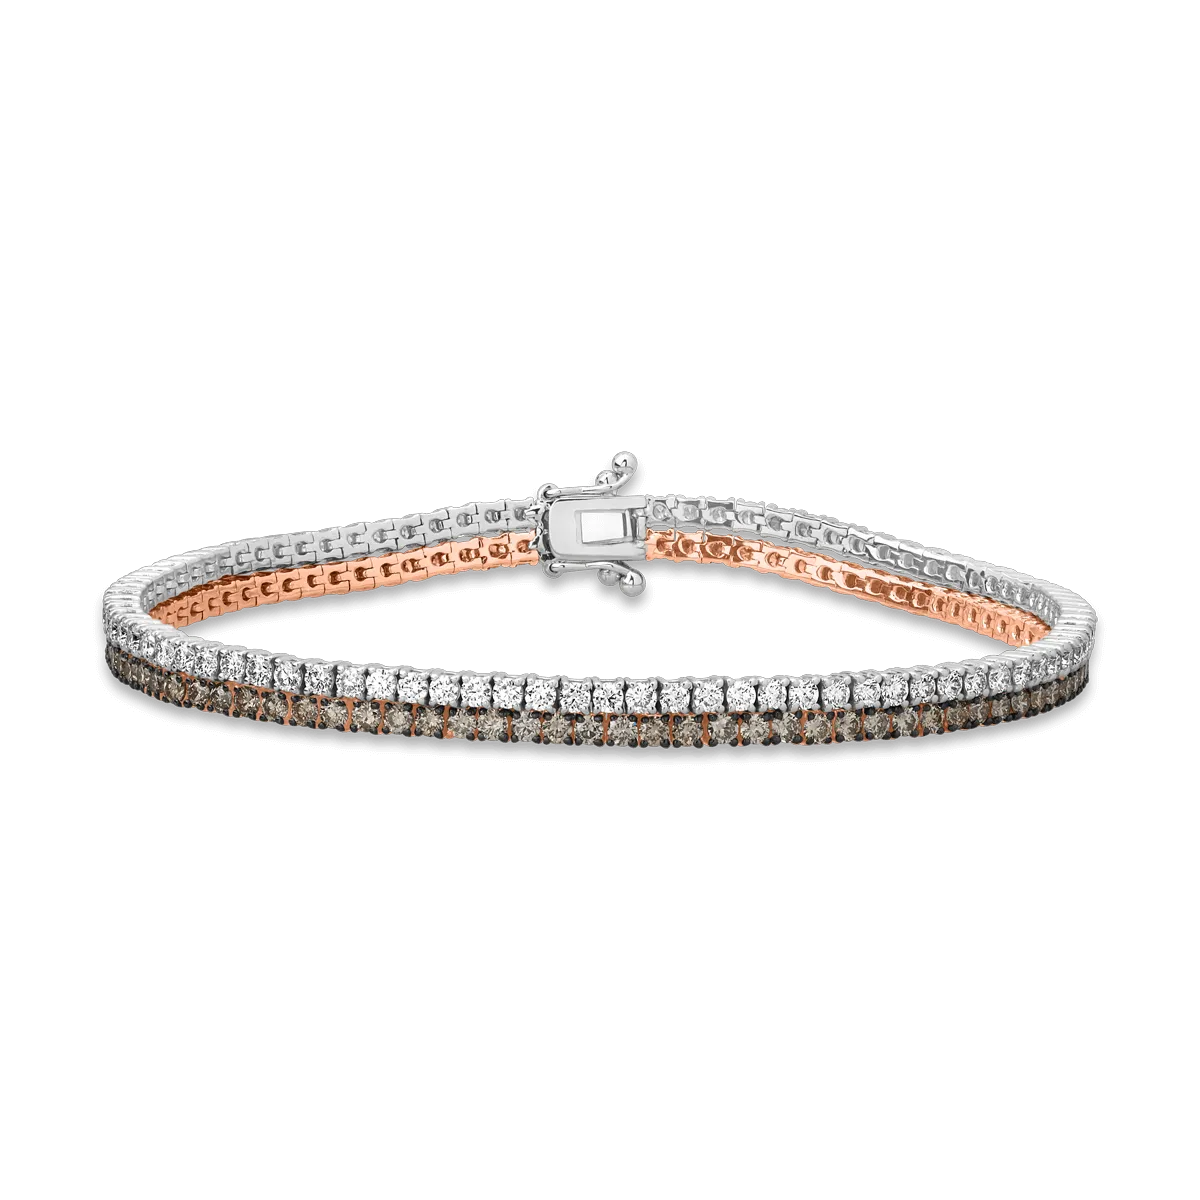 18K white-rose gold tennis bracelet with clear diamonds of 2.35ct and brown diamonds of 2.35ct